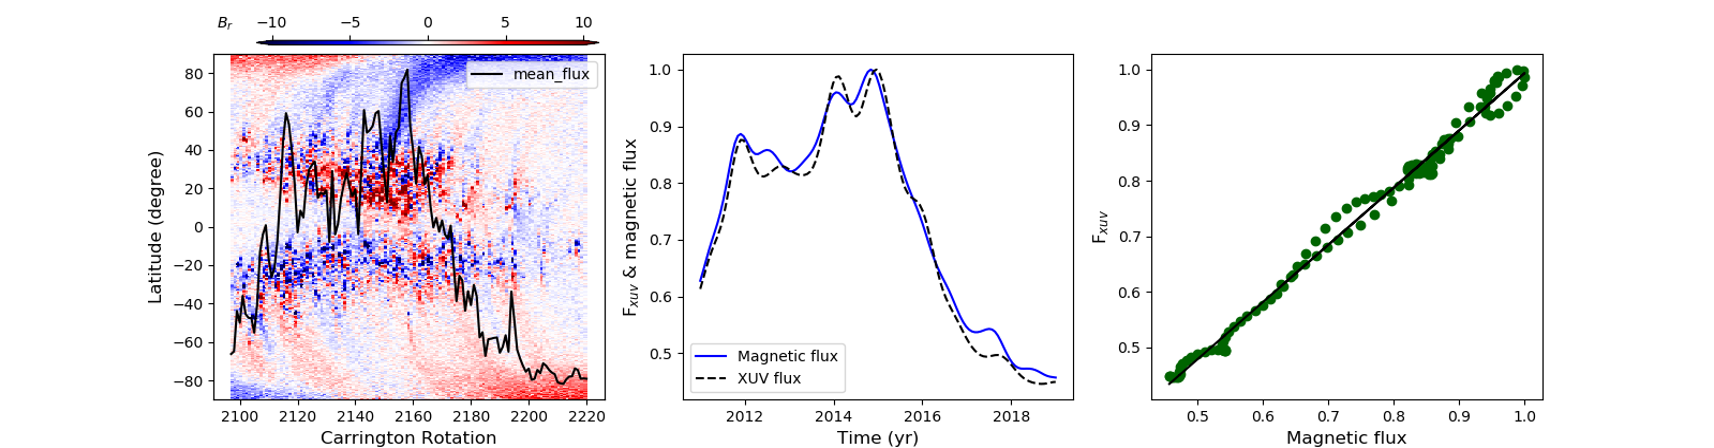  Left: Azimuthally-averaged high resolution surface magnetic field from HMI magnetogram over solar cycle 24 with meanflux in black solid line. Middle: The direct comparison of smoothed mean magnetic flux and XUV flux over 1 year window and Right: The correlation plot between mean magnetic flux and XUV flux.